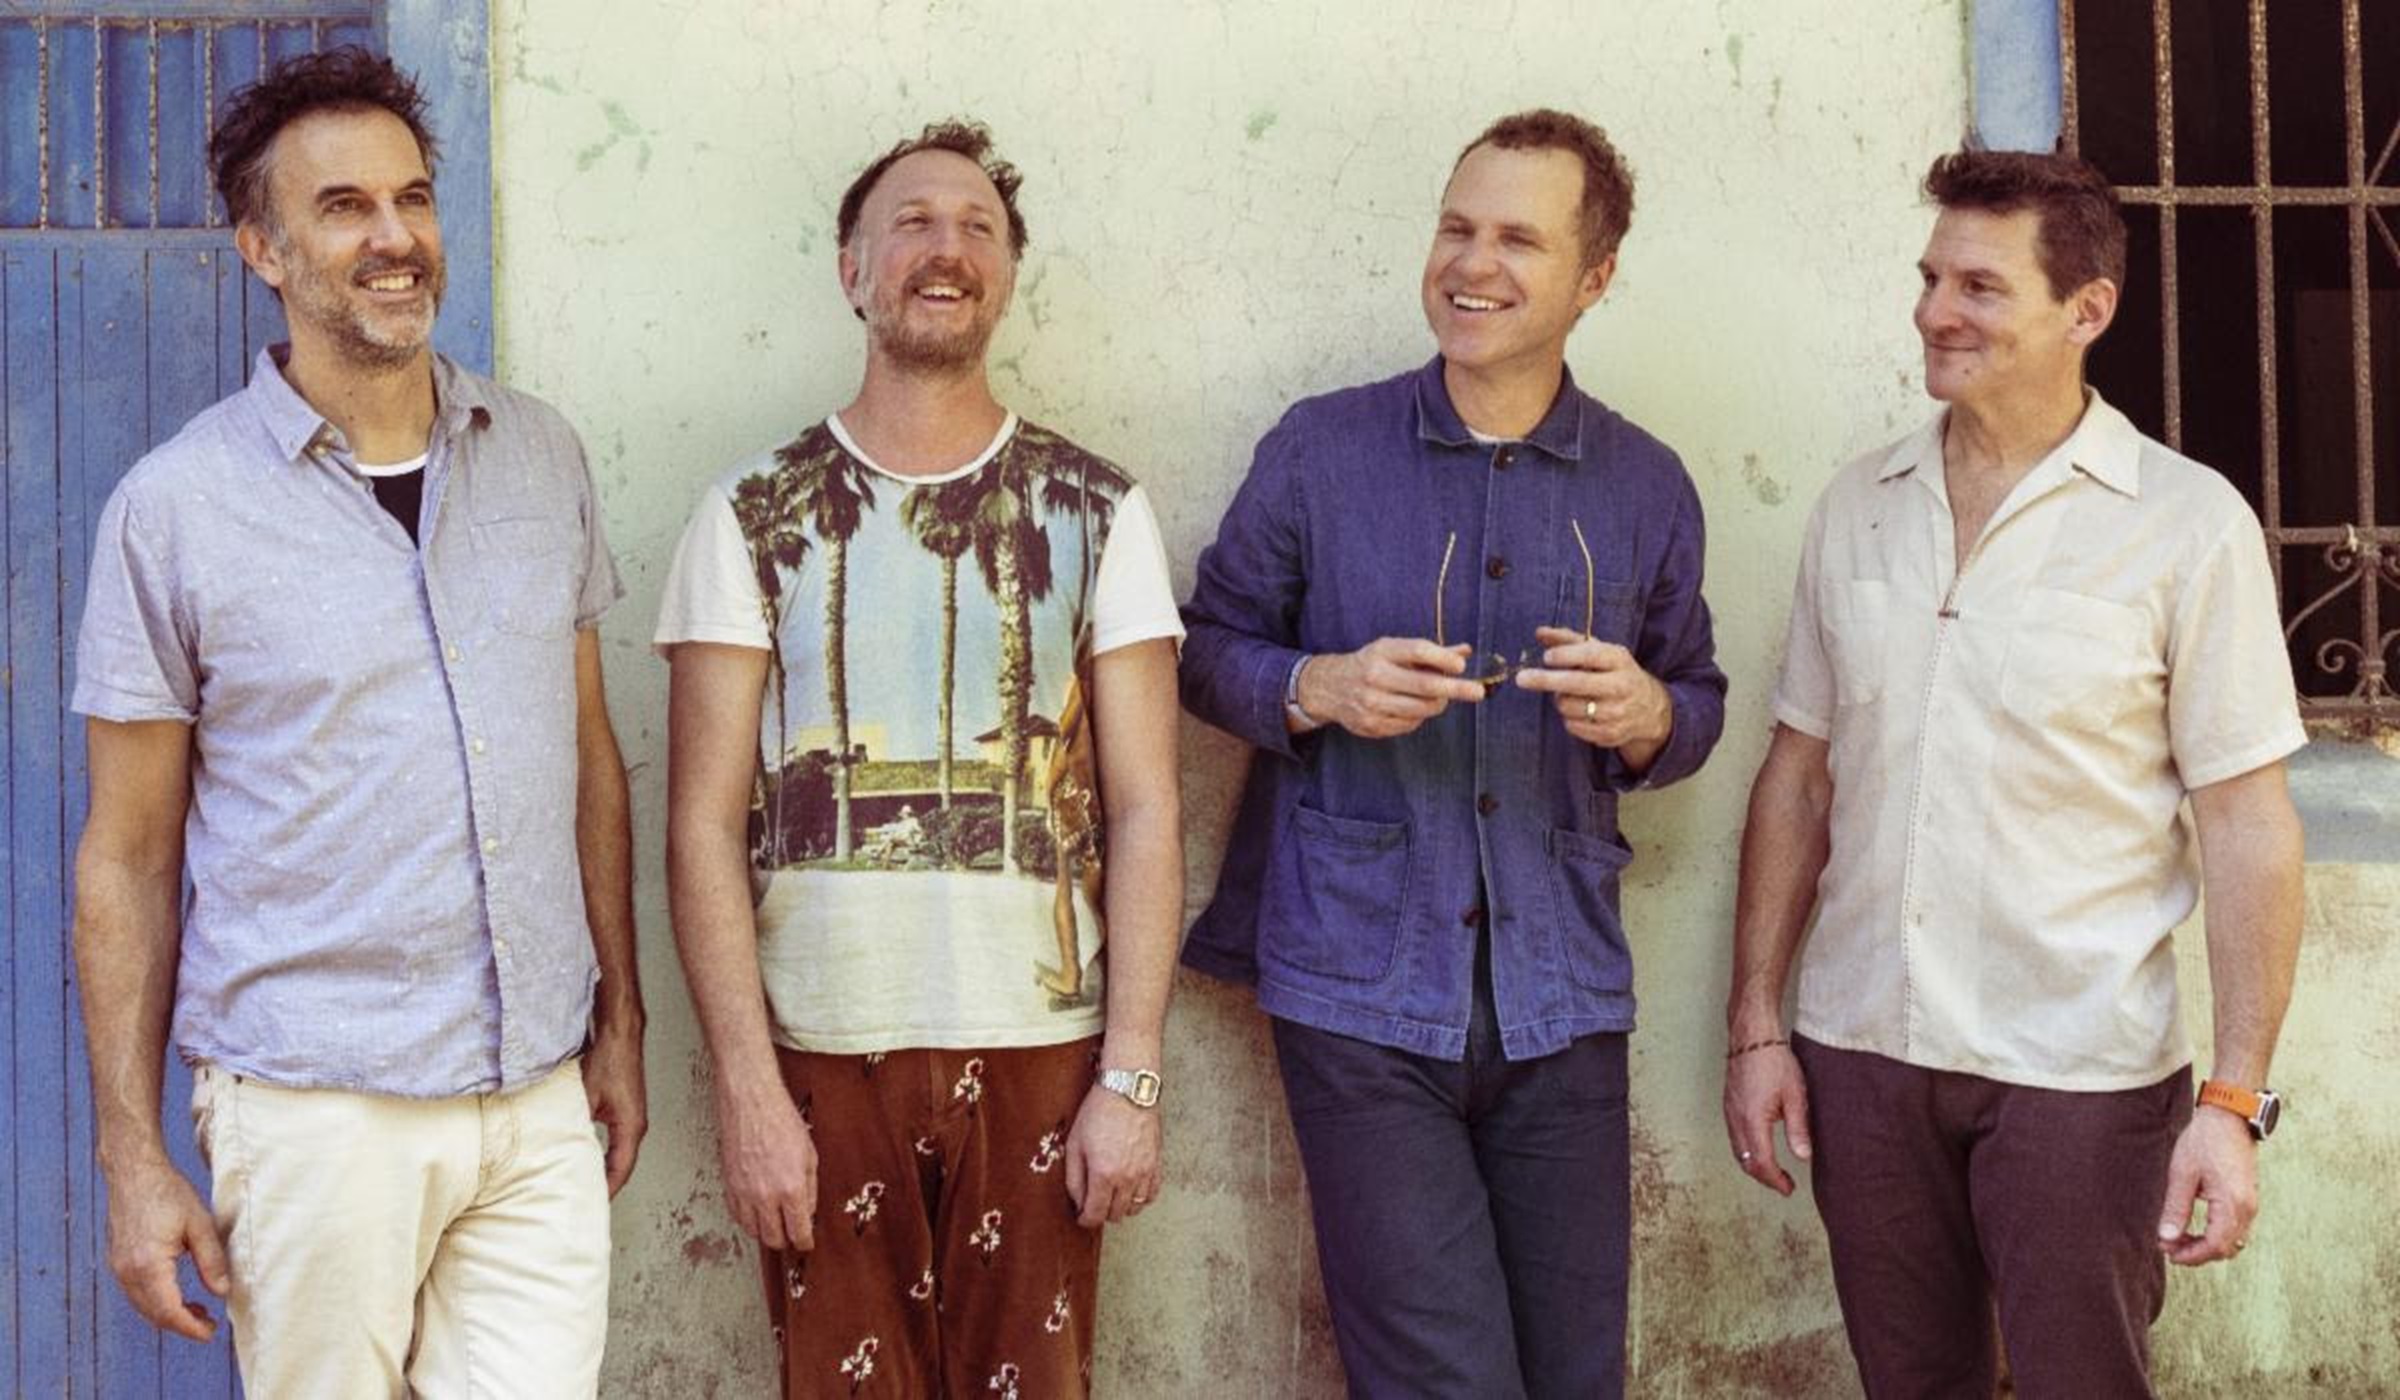 Due to overwhelming fan demand, Guster shares new song "The Elevator"